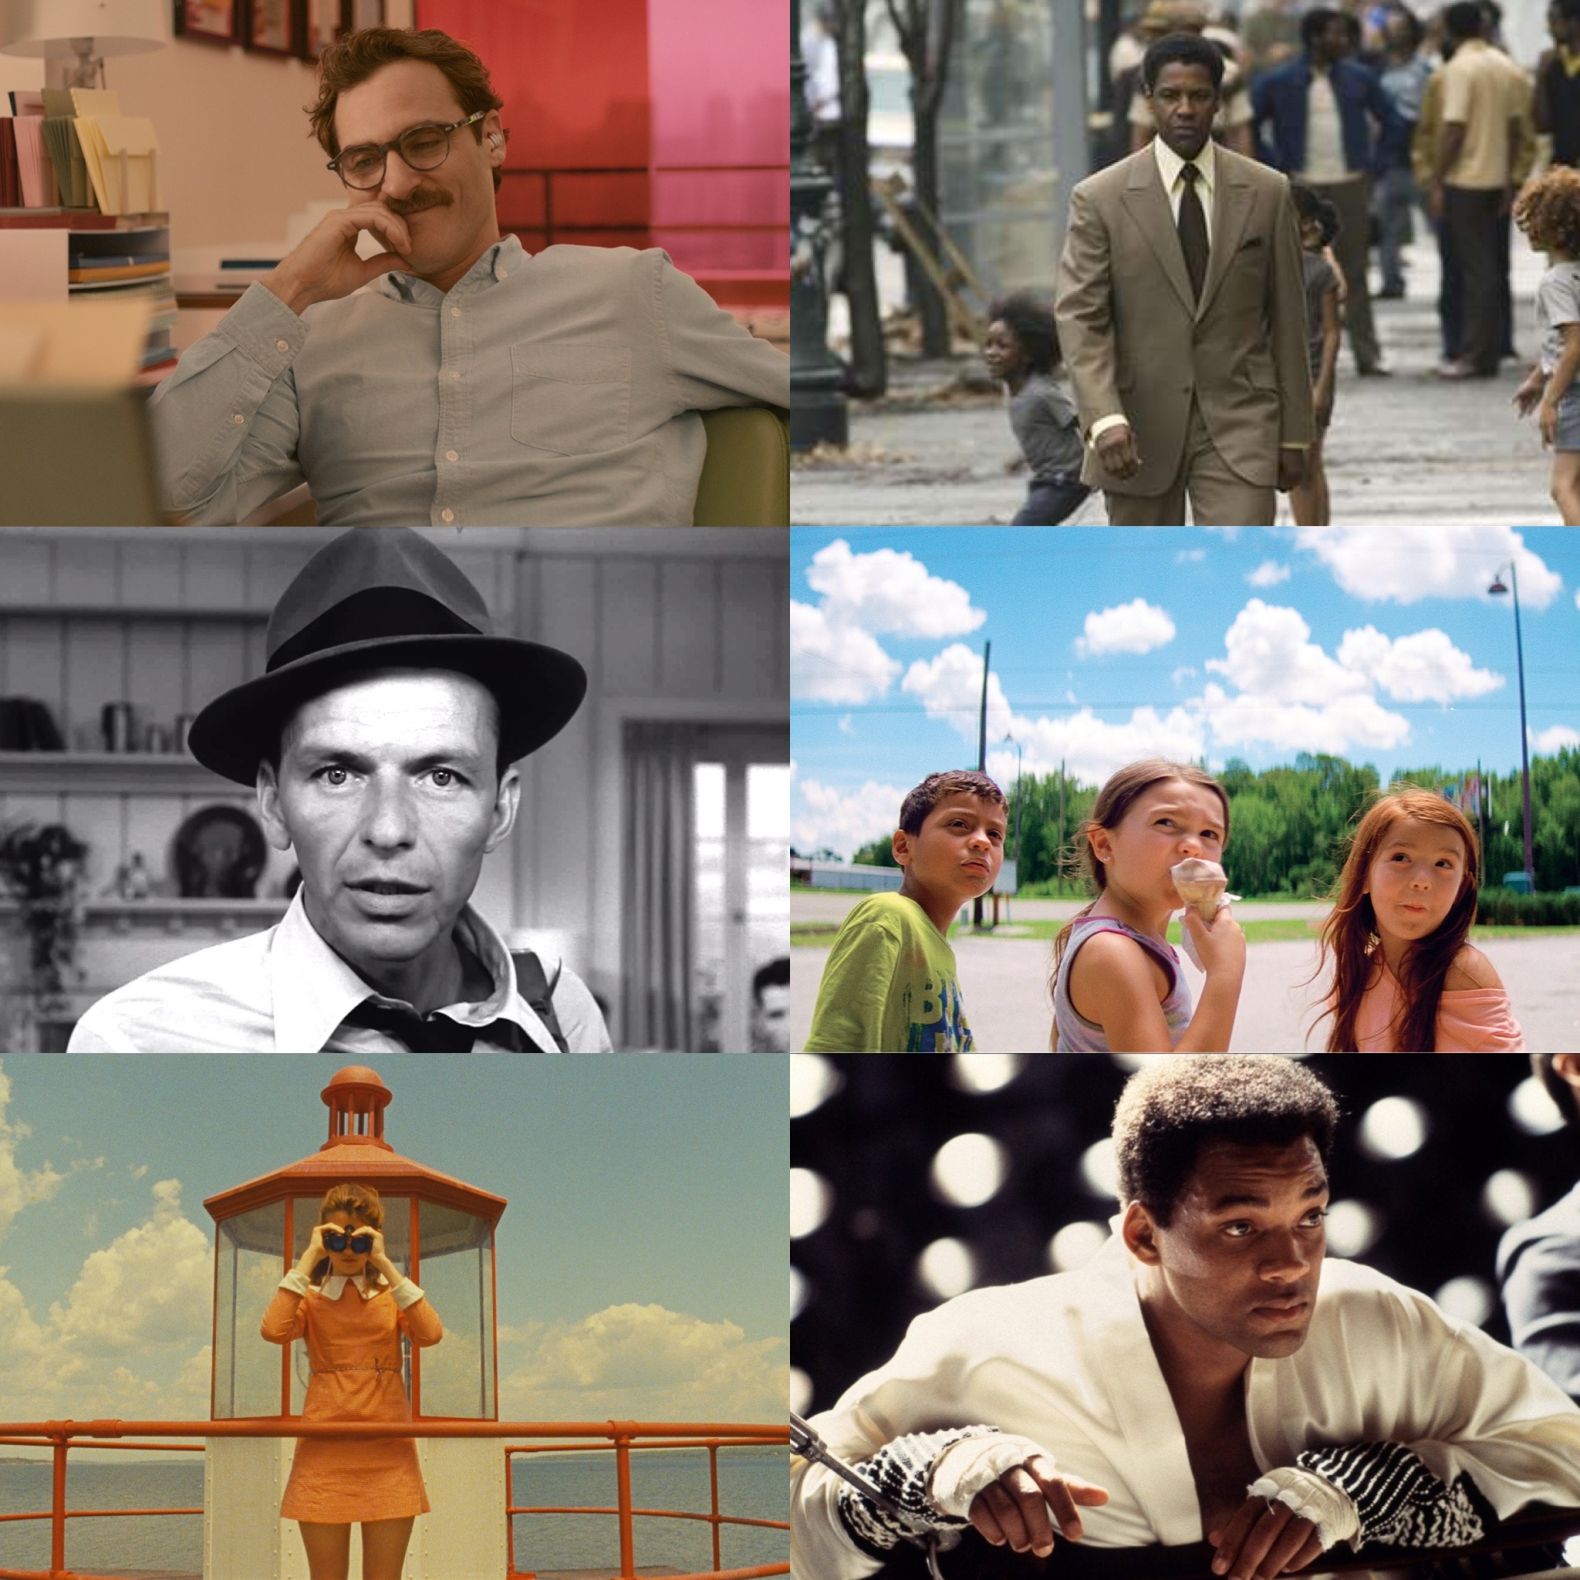 Duke Box #21: Our Guide to the Best Films on TV